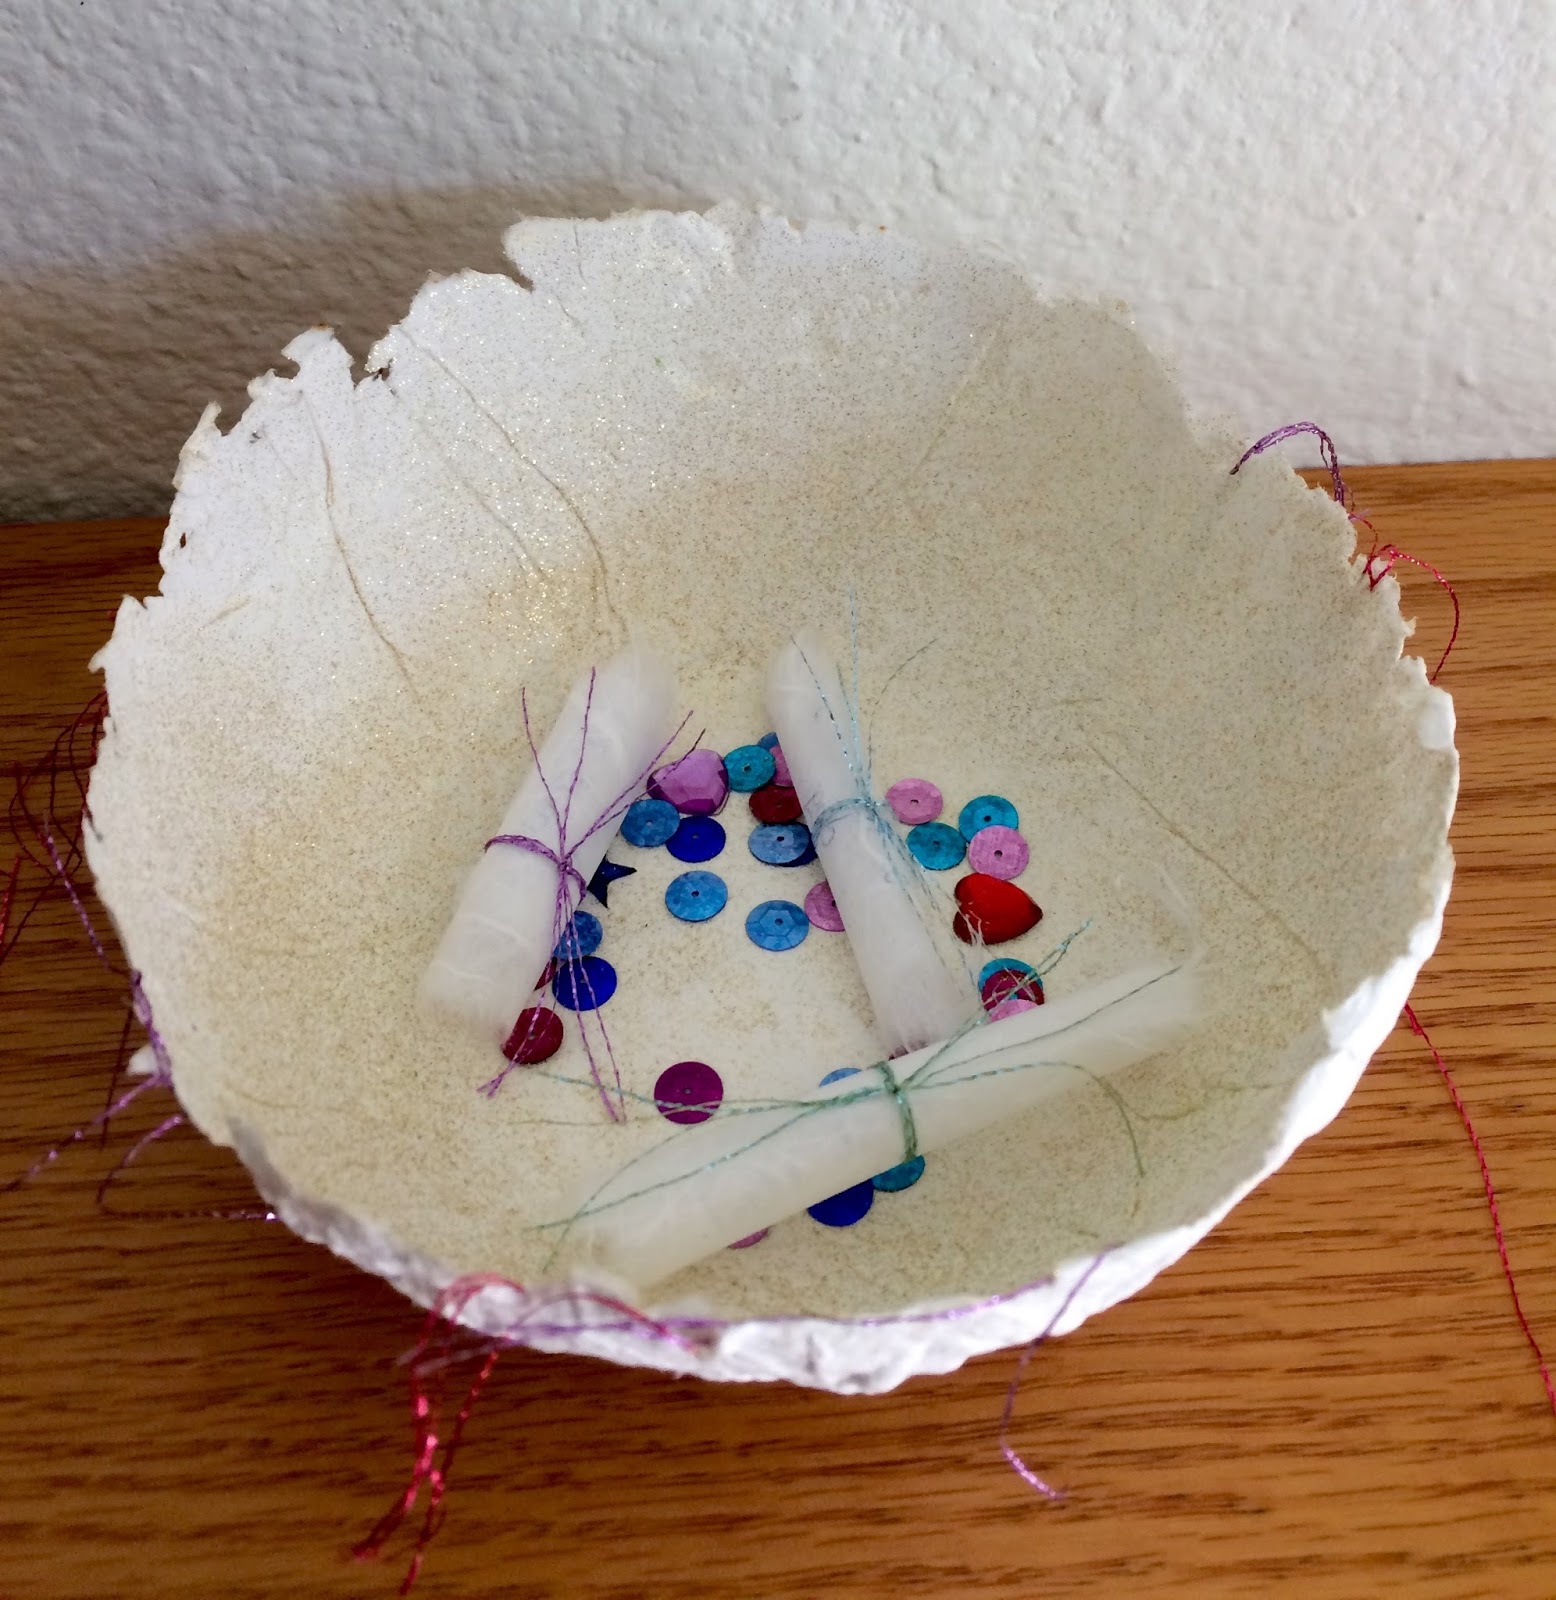 Kathy's Art Project Ideas: Handmade Paper Wish Bowls and Paper Casting  Lesson